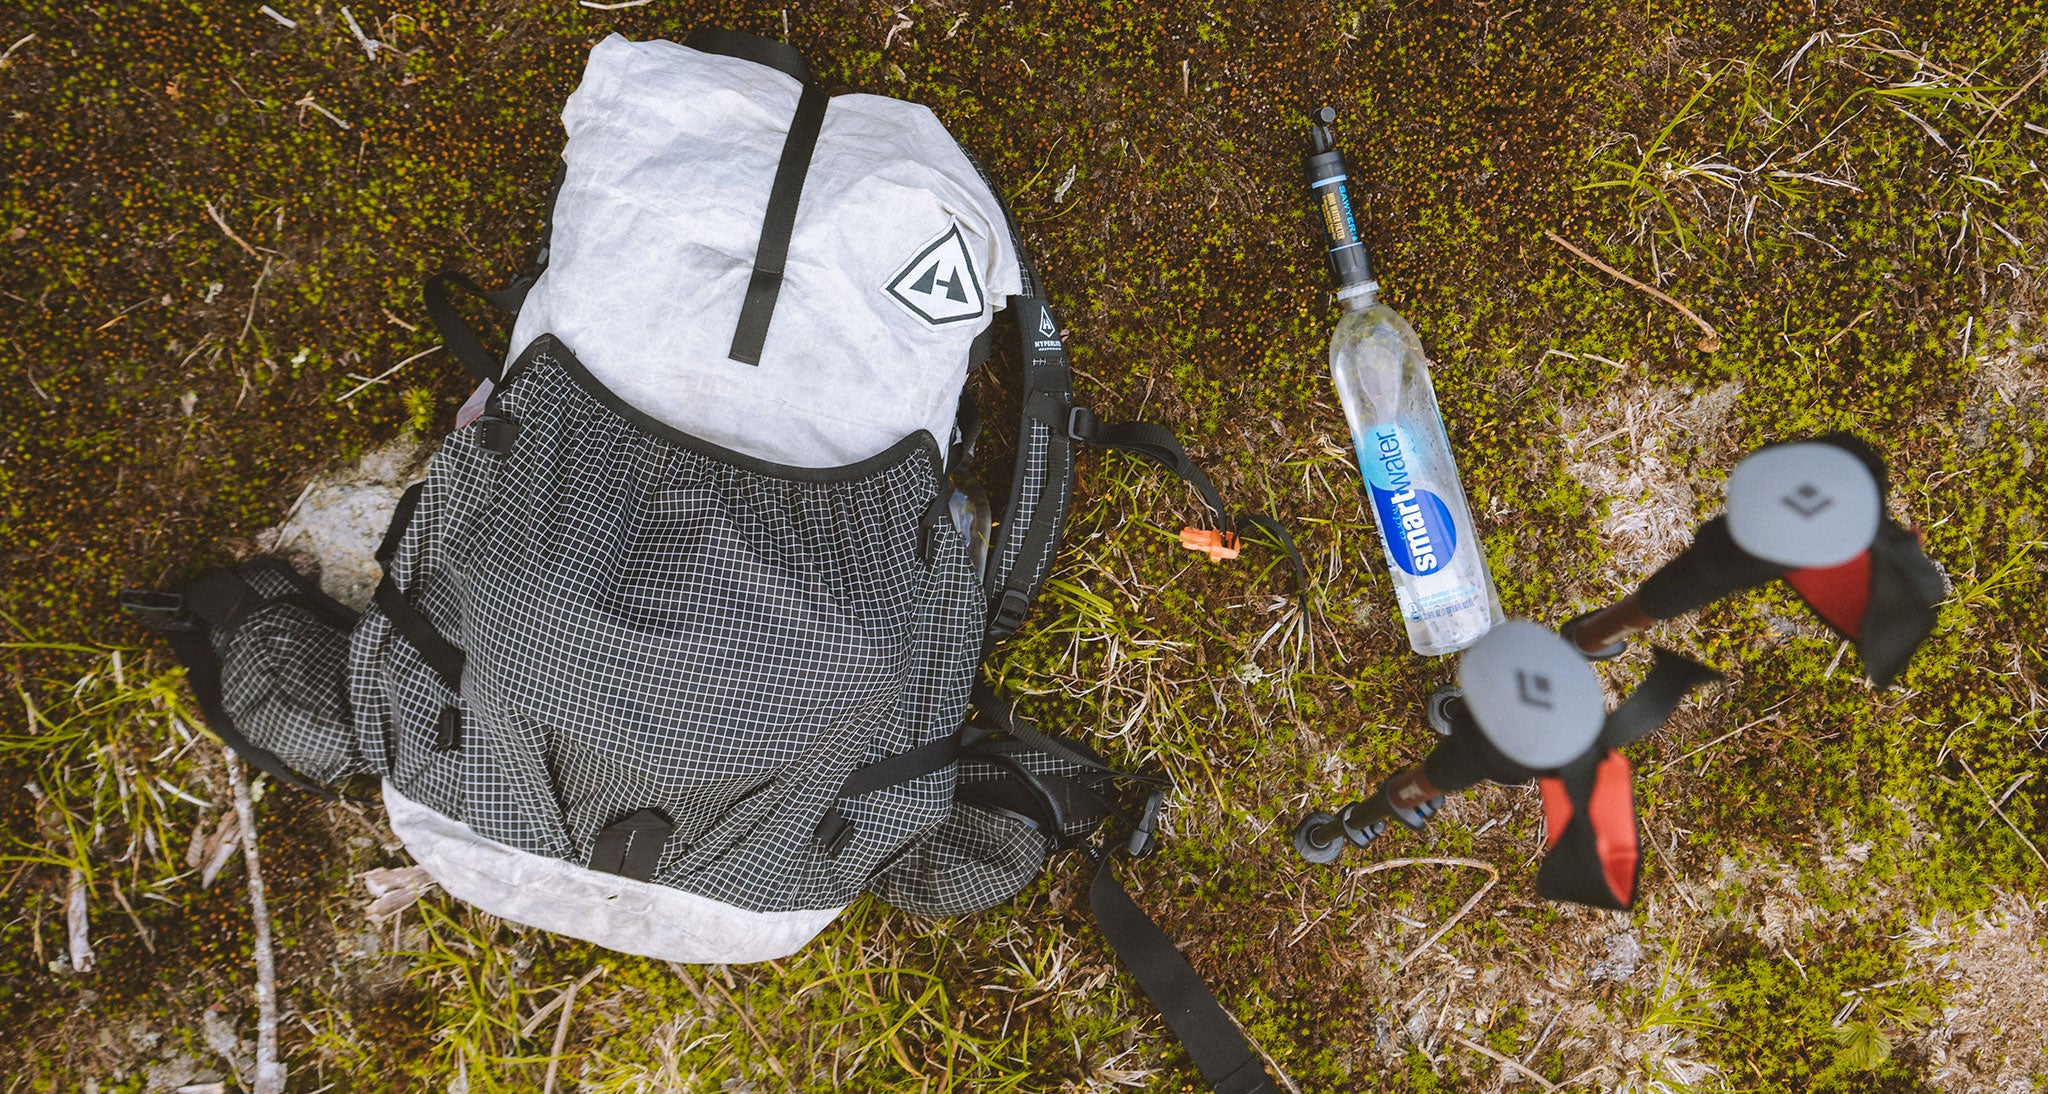 Water filter and ultralight pack